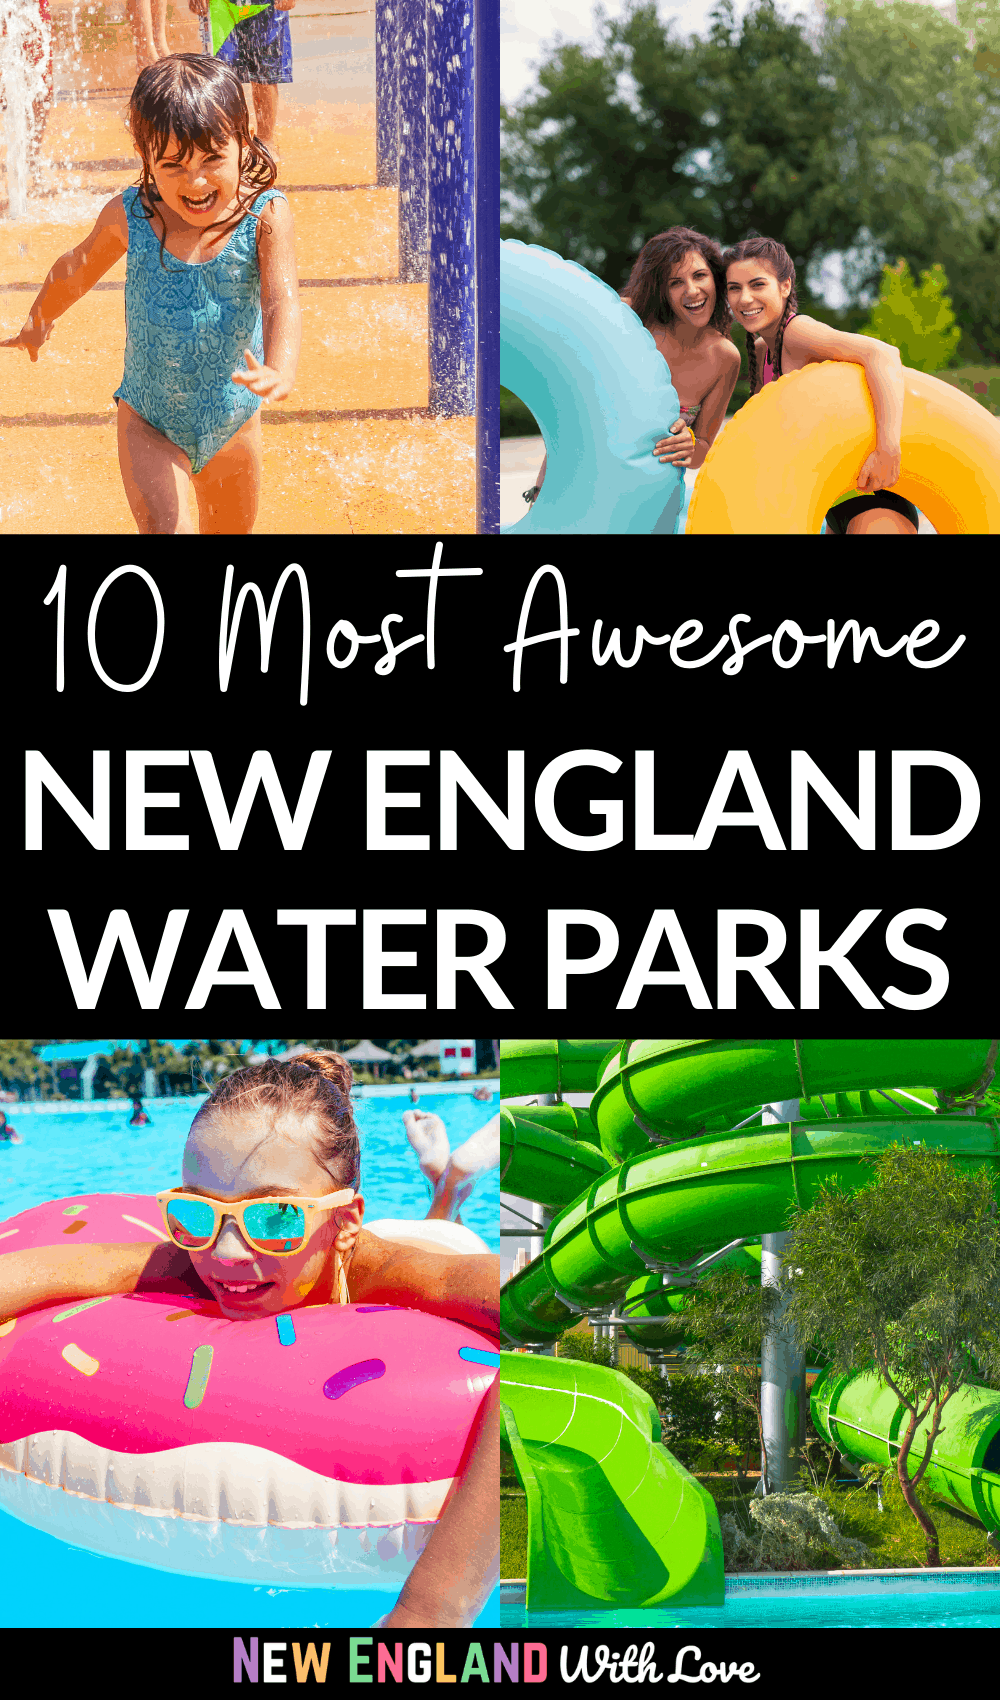 Pinterest graphic reading "10 Most Awesome NEW ENGLAND WATER PARKS"